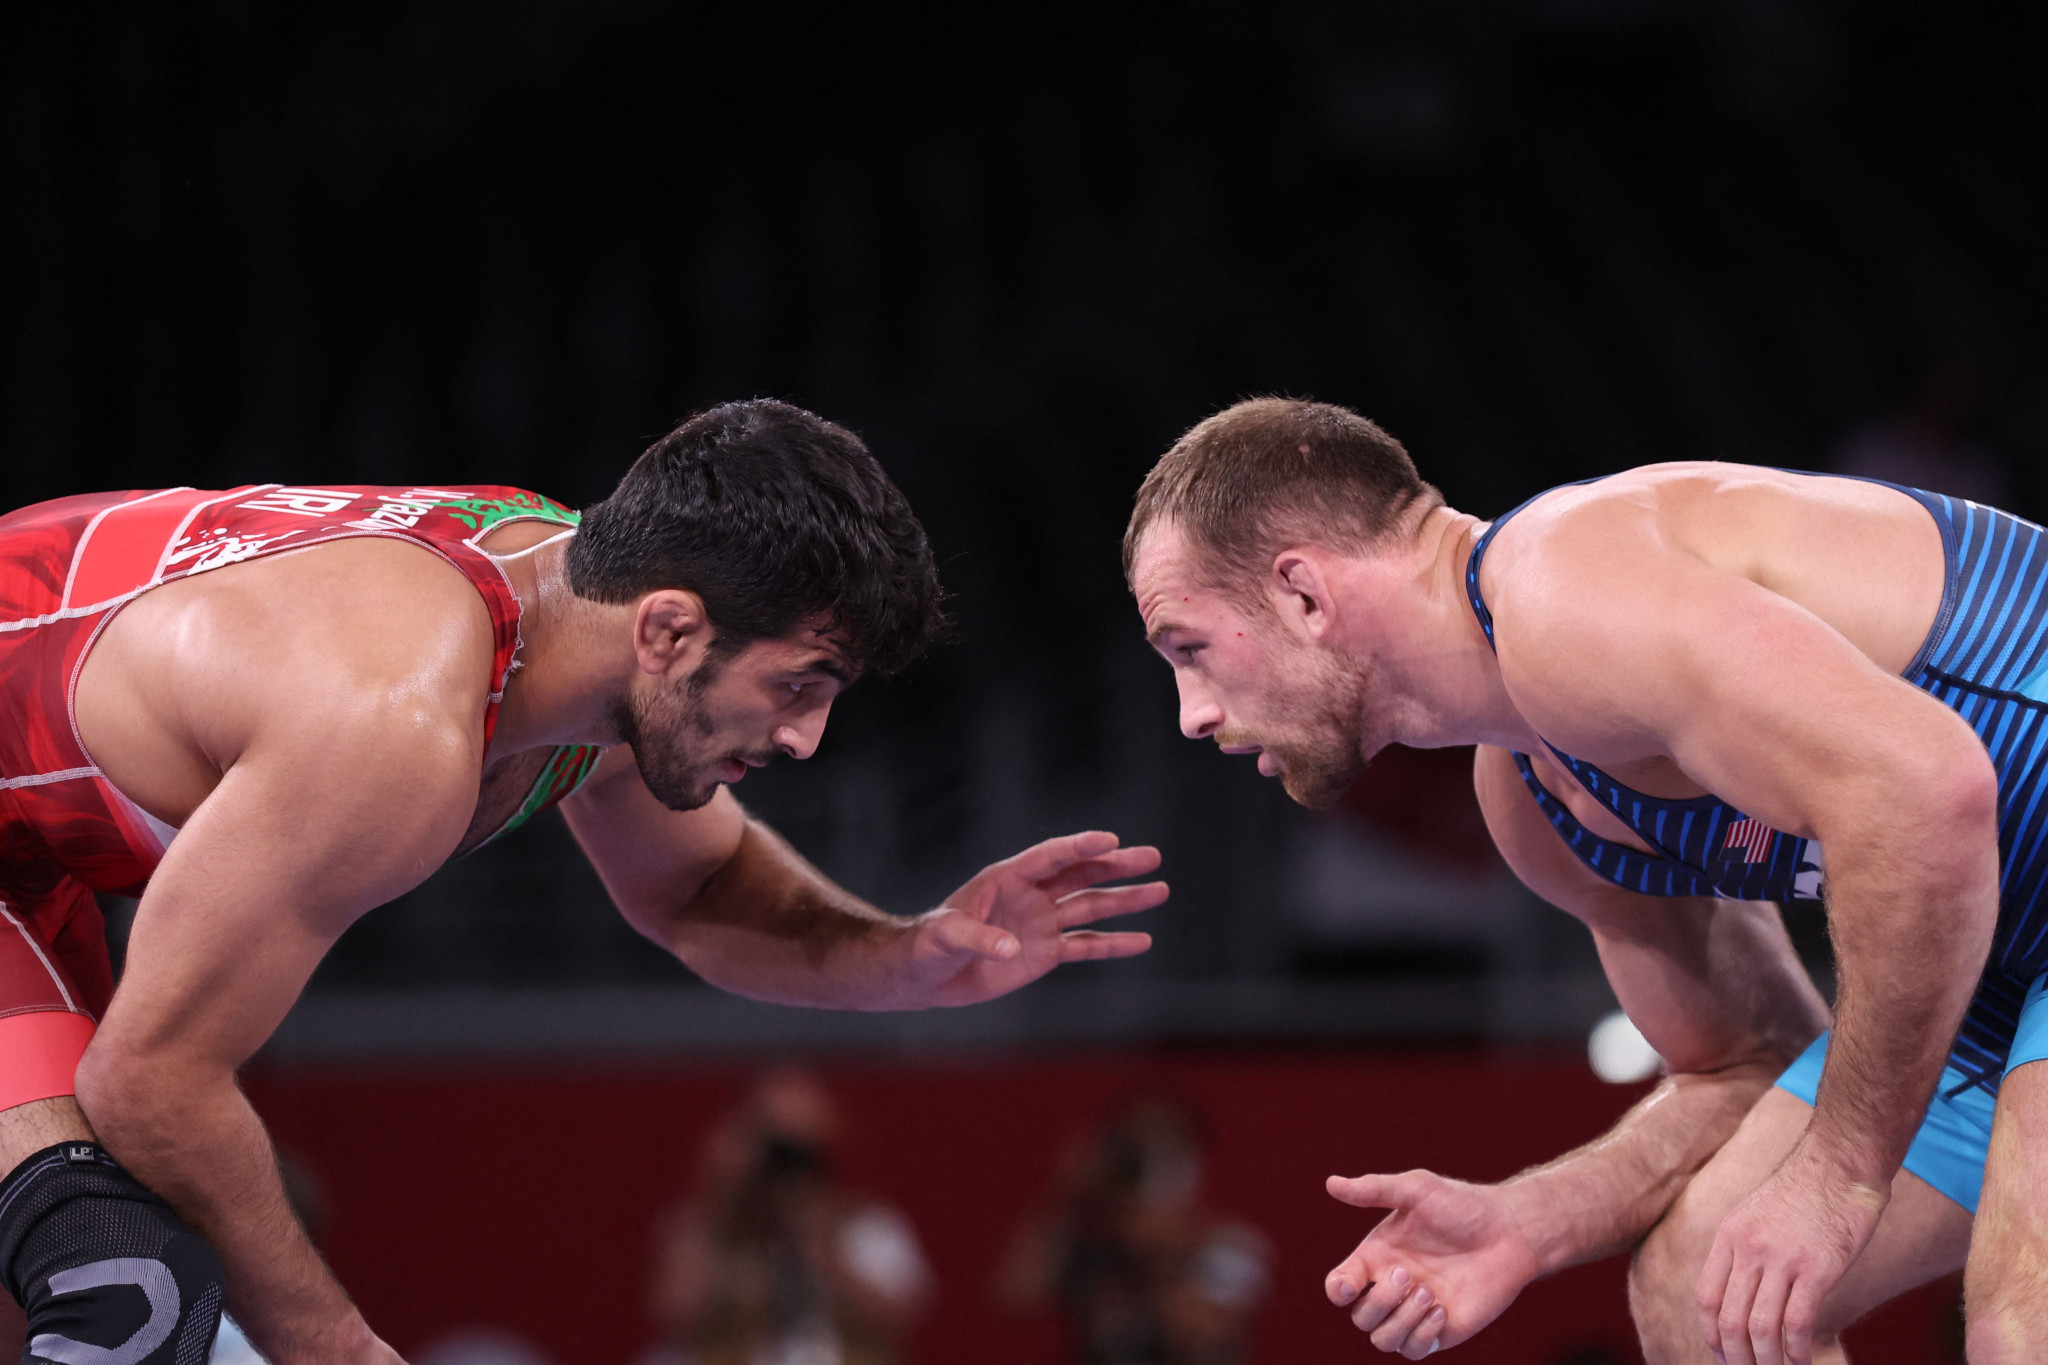 Iran pulls out of wrestling match in United States due to visa issues